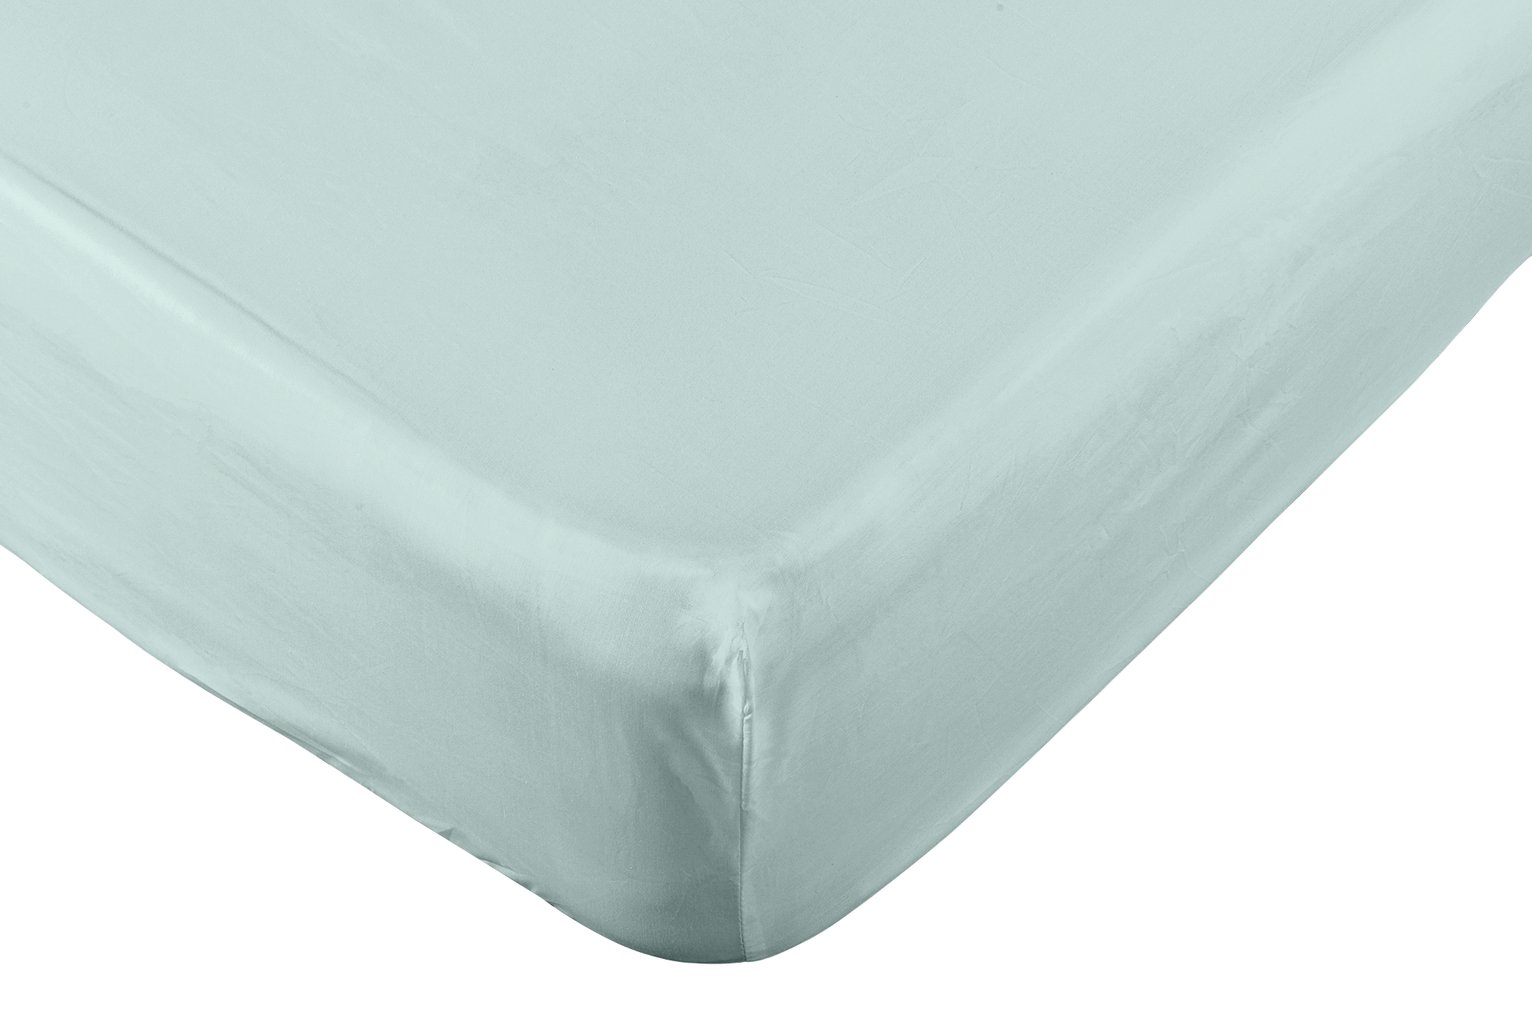 Argos Home Easycare 100% Cotton 28cm Fitted Sheet - Double